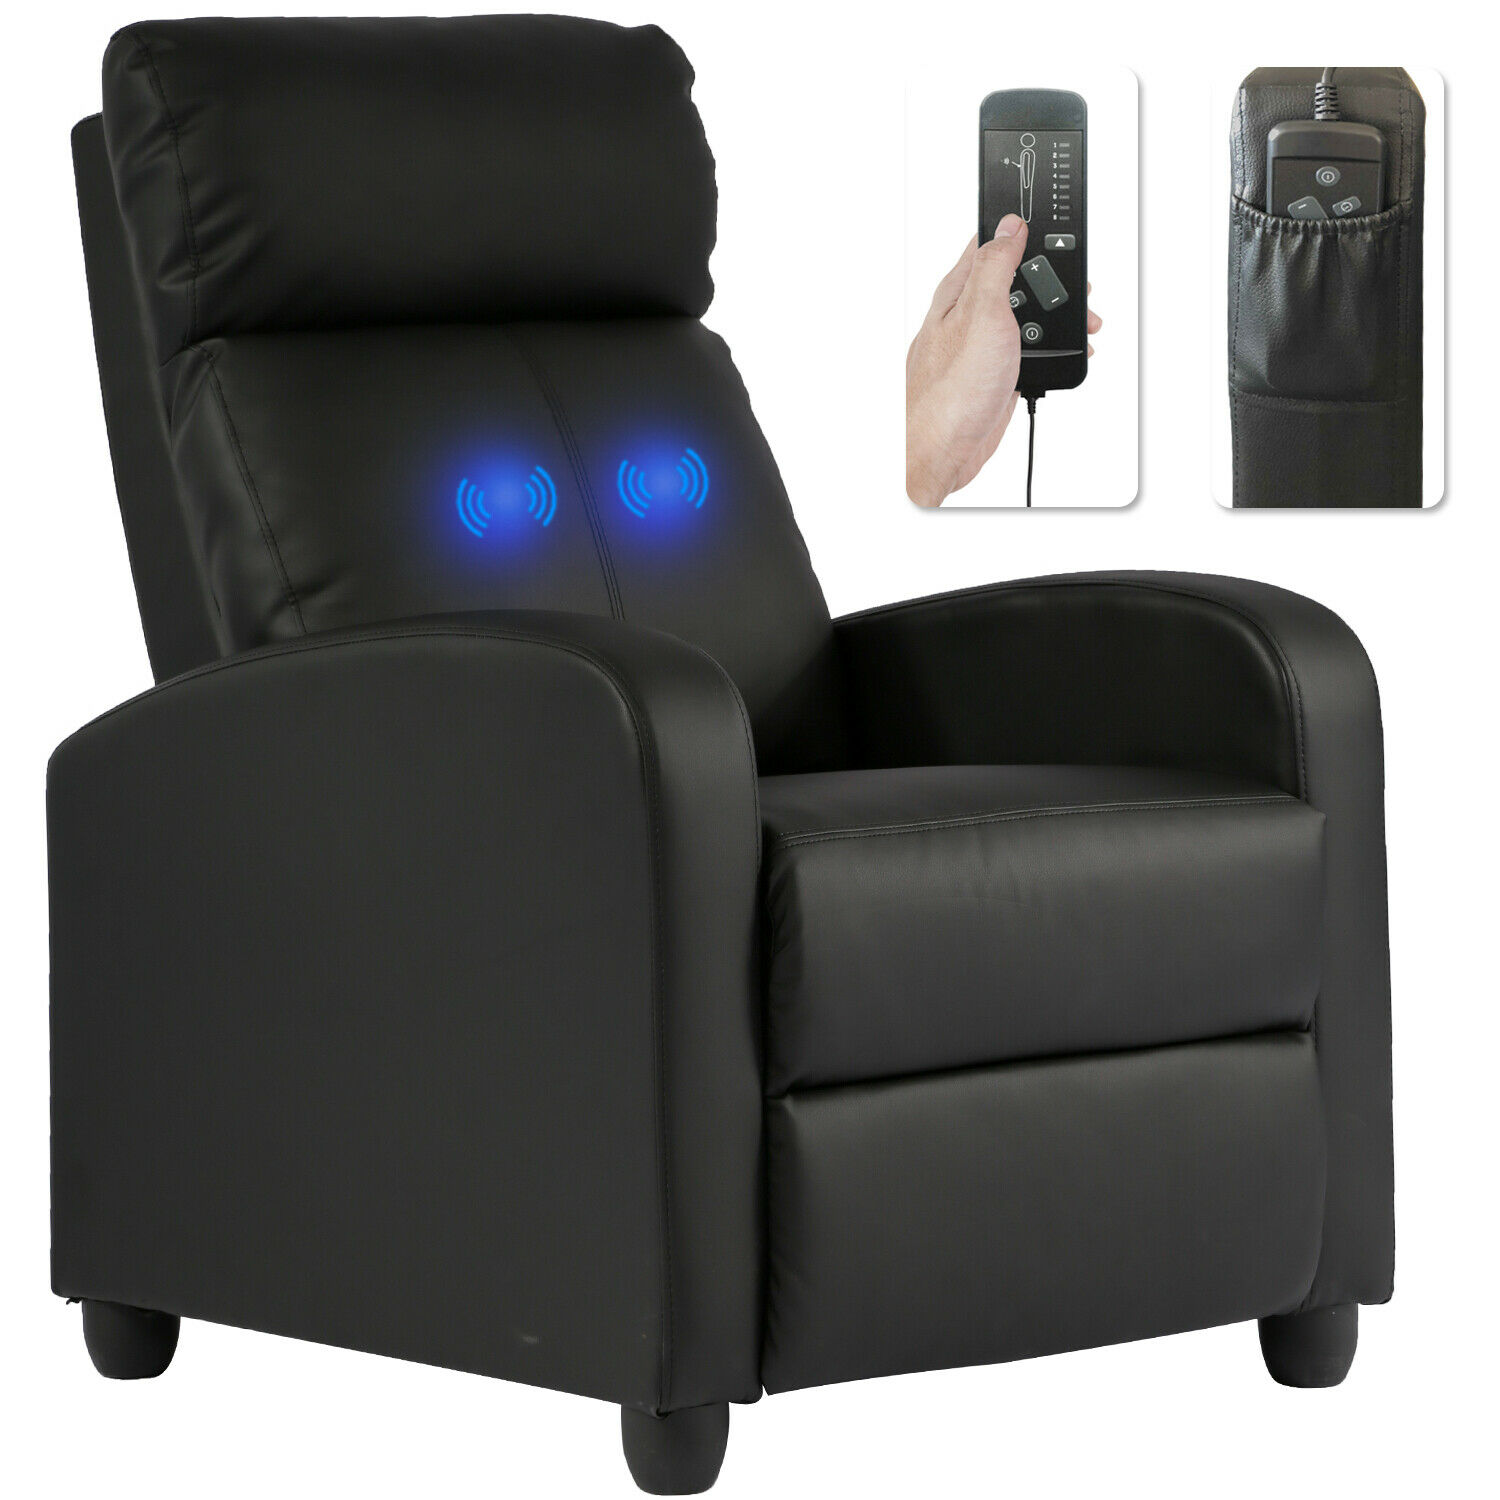 Recliner Chair Reading Chair Winback Single Sofa Home Theater Seating Modern